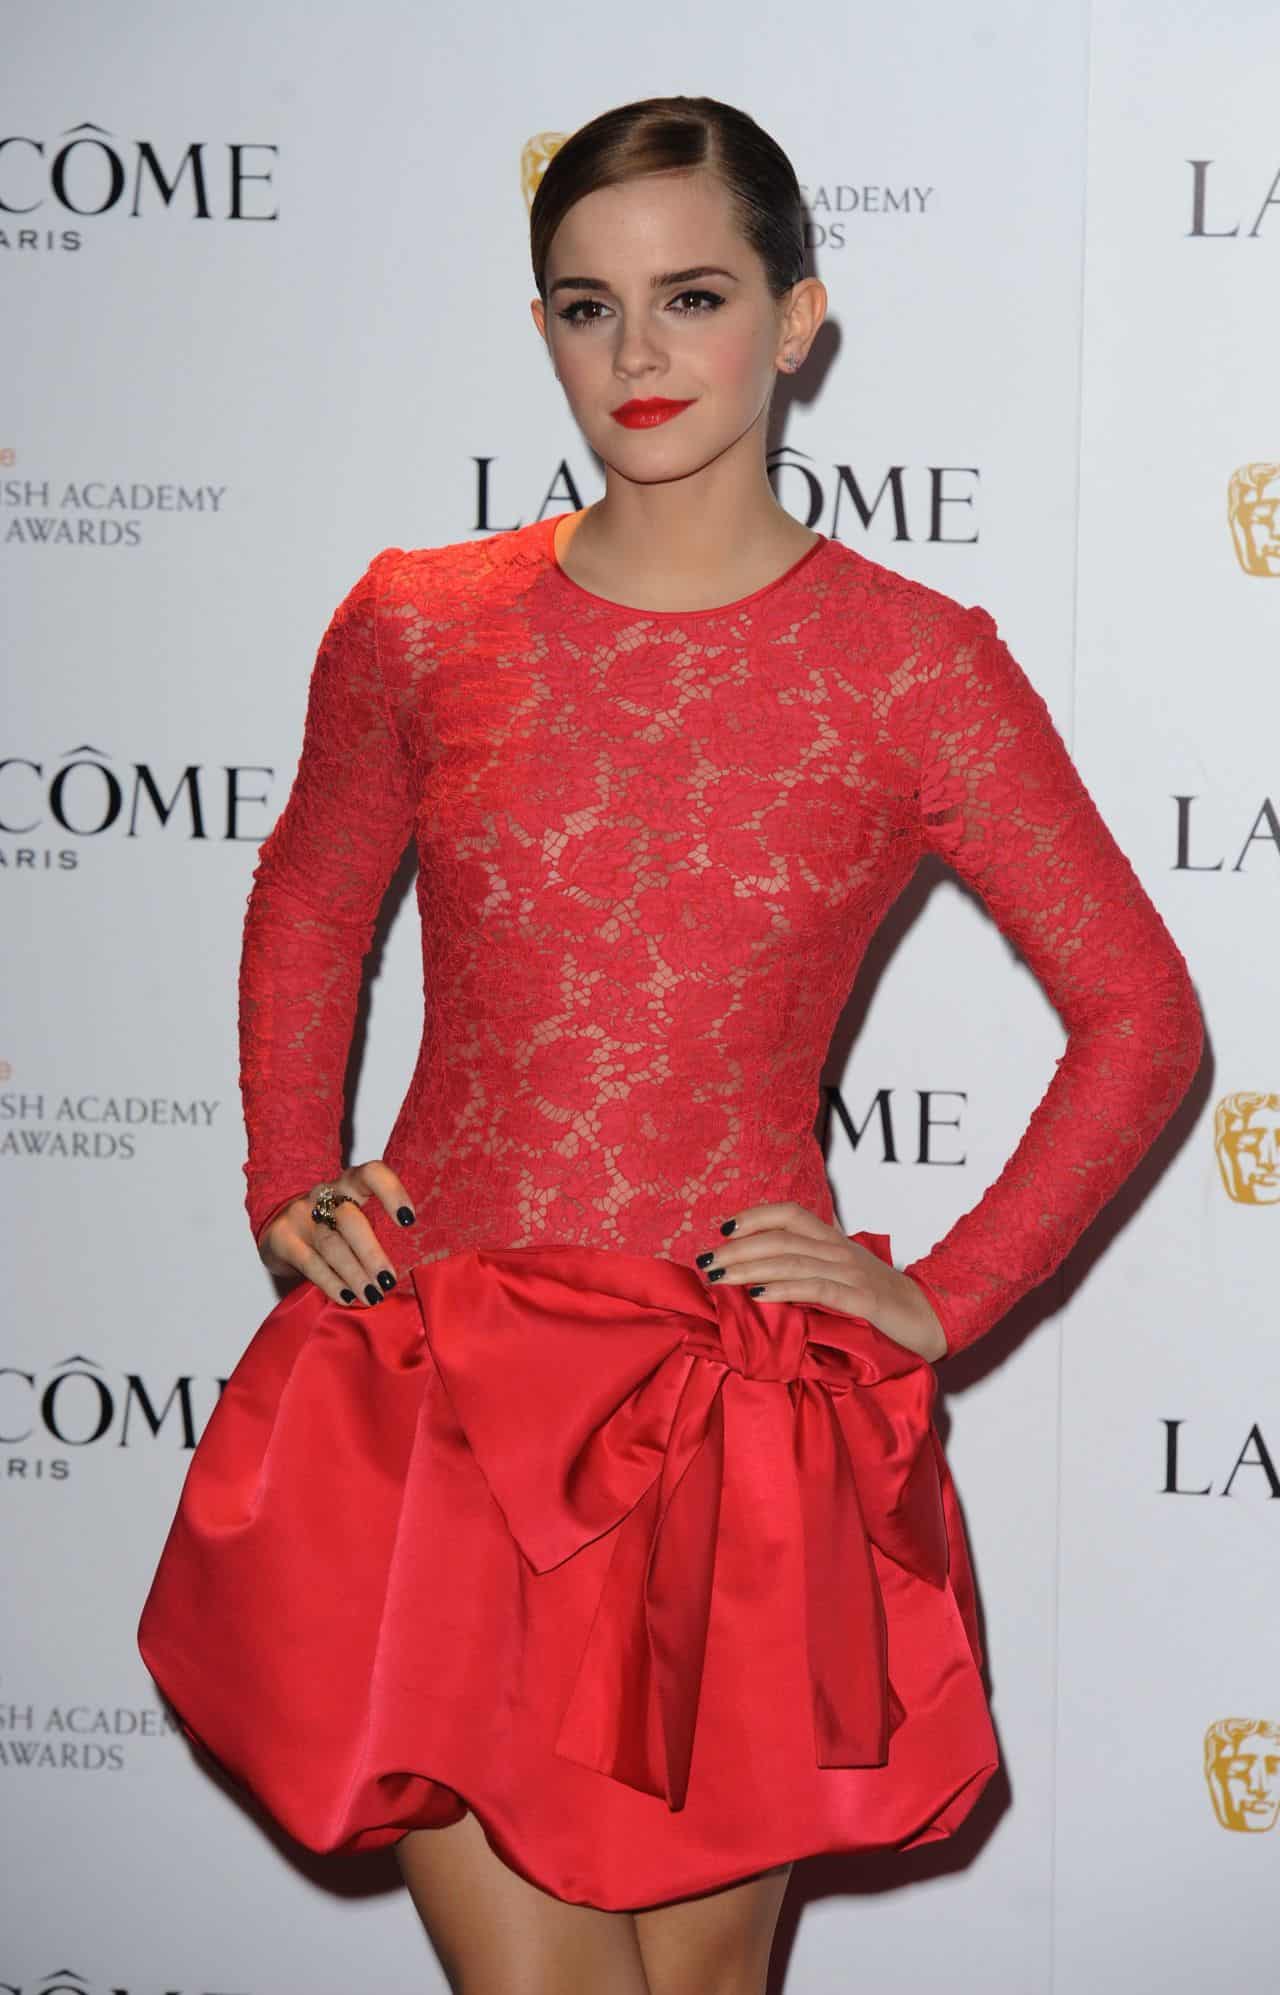 Emma Watson Steals the Show in a Sheer Red Dress at the pre-Bafta Party